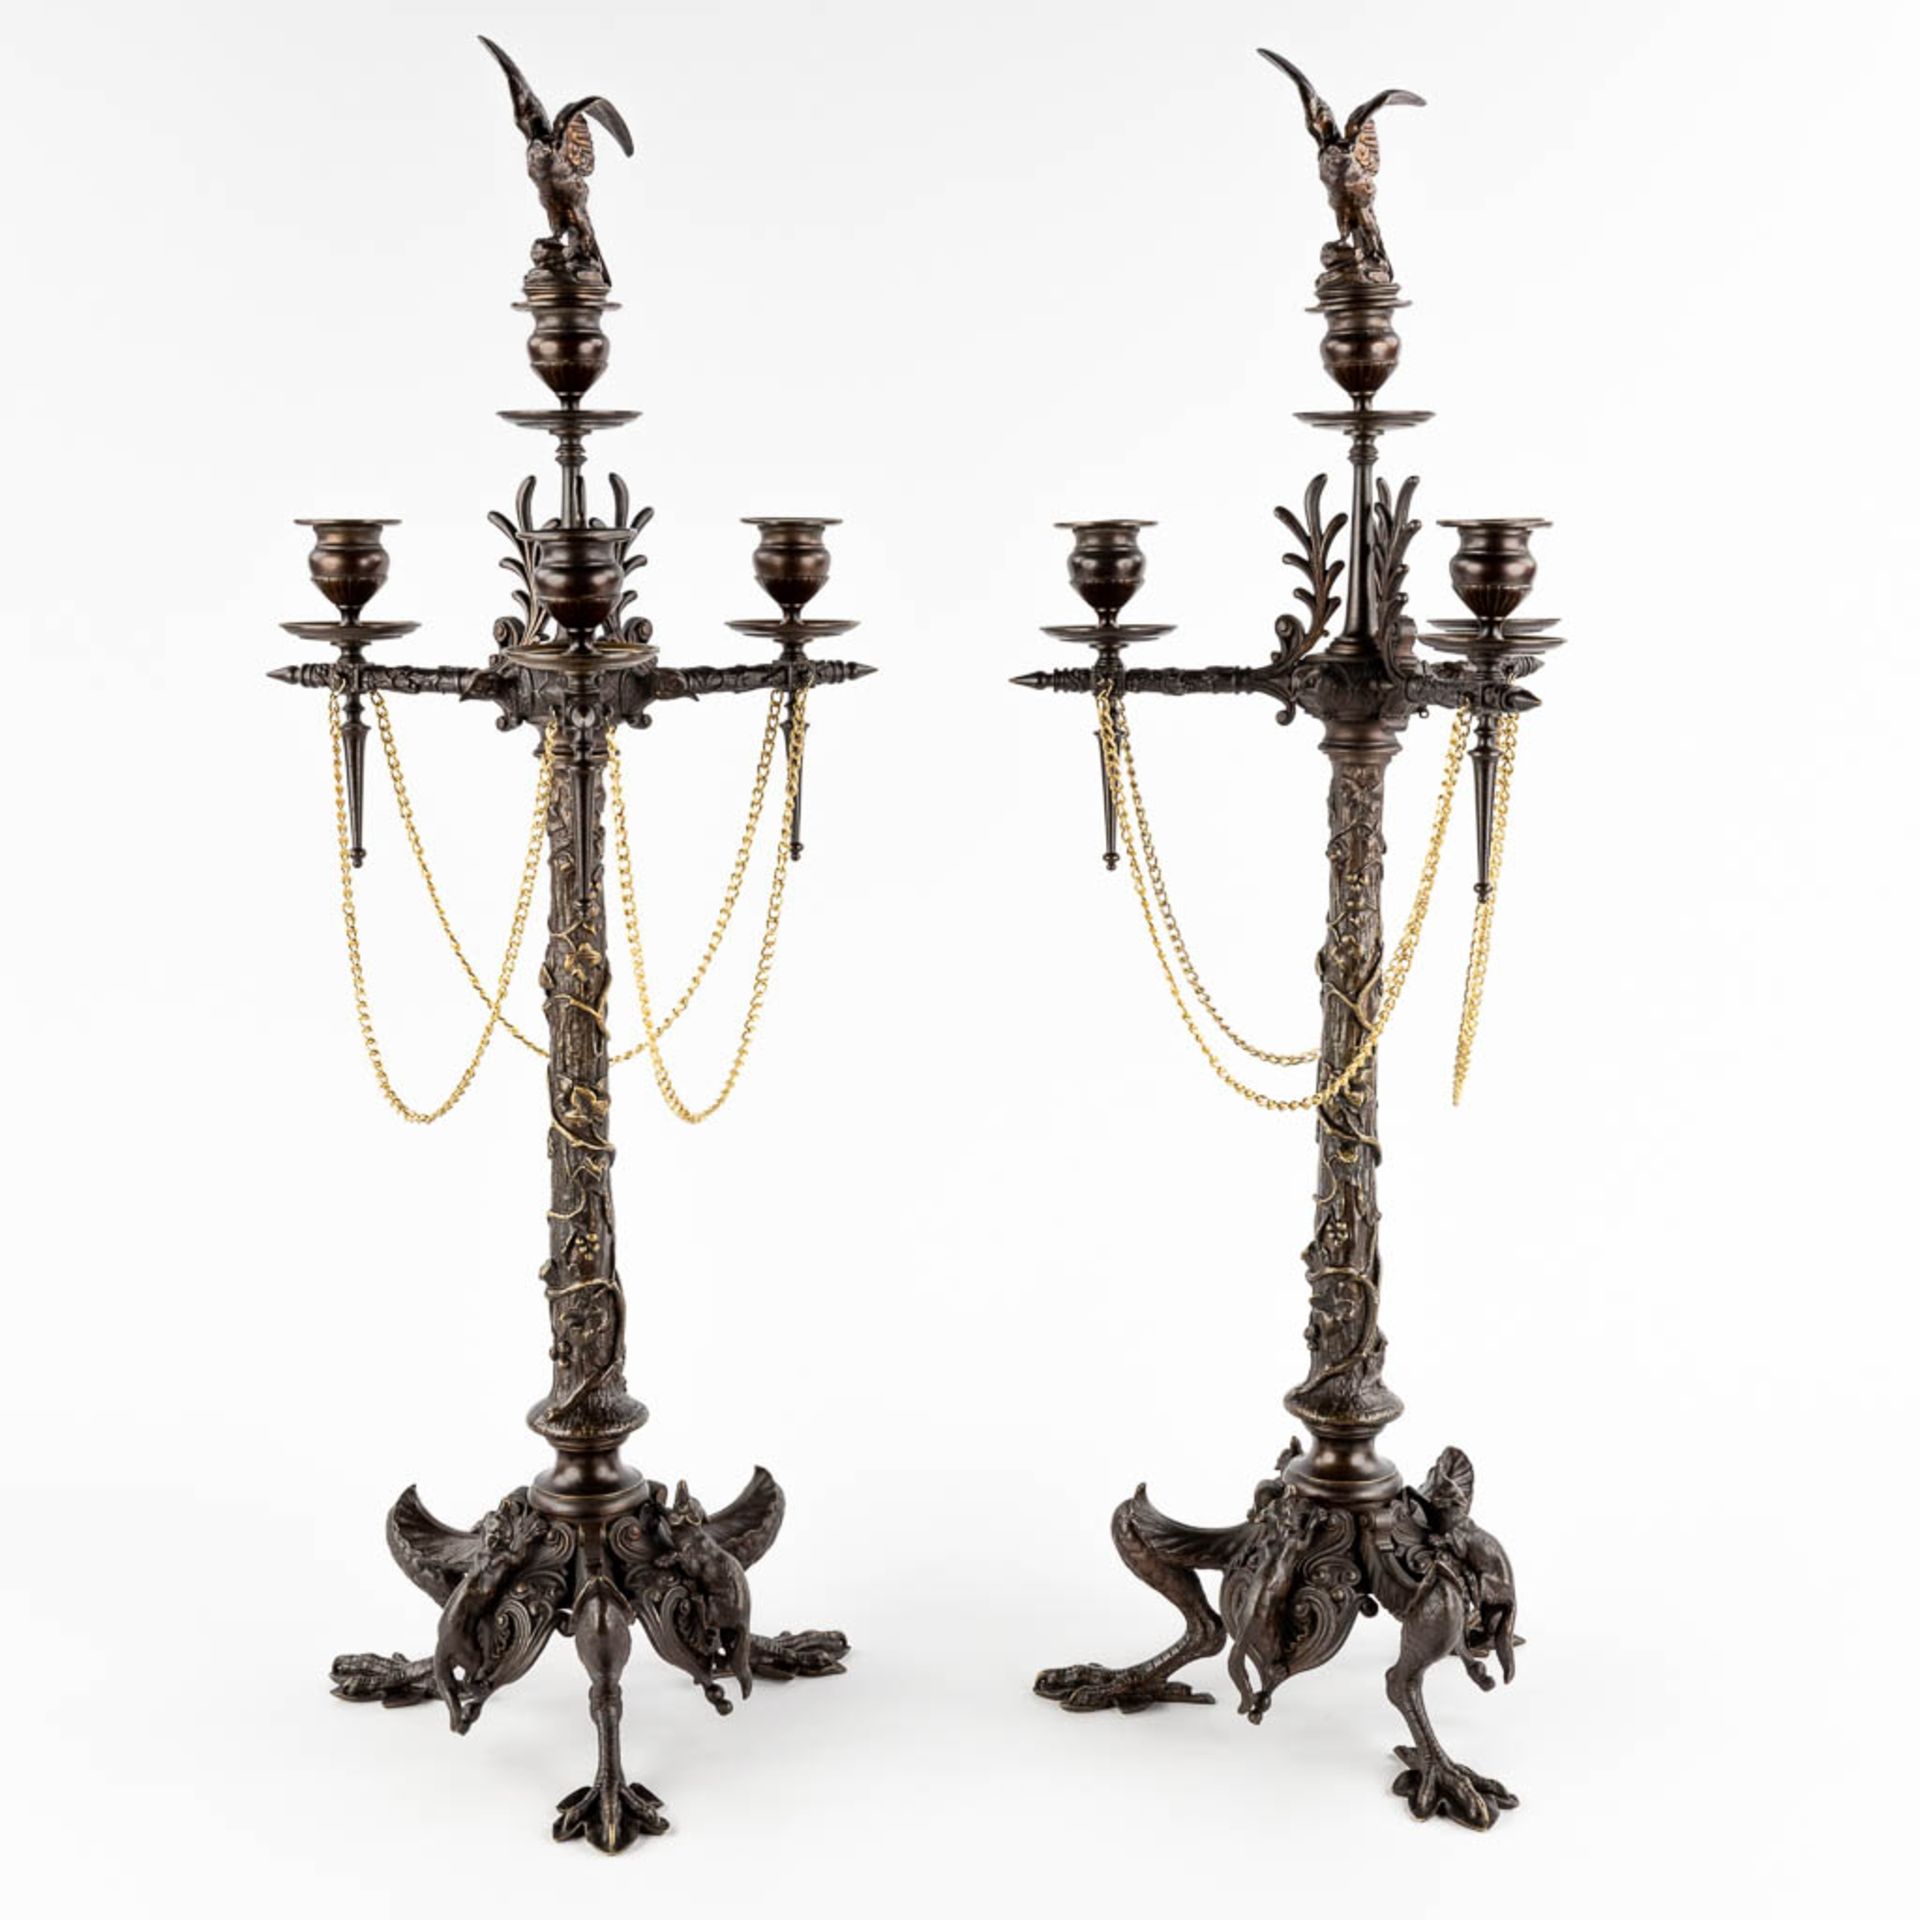 Jules MOIGNIEZ (1835-1894) 'Candelabra with birds and foxes' patinated bronze. (H:72 x D:24 cm) - Image 4 of 14